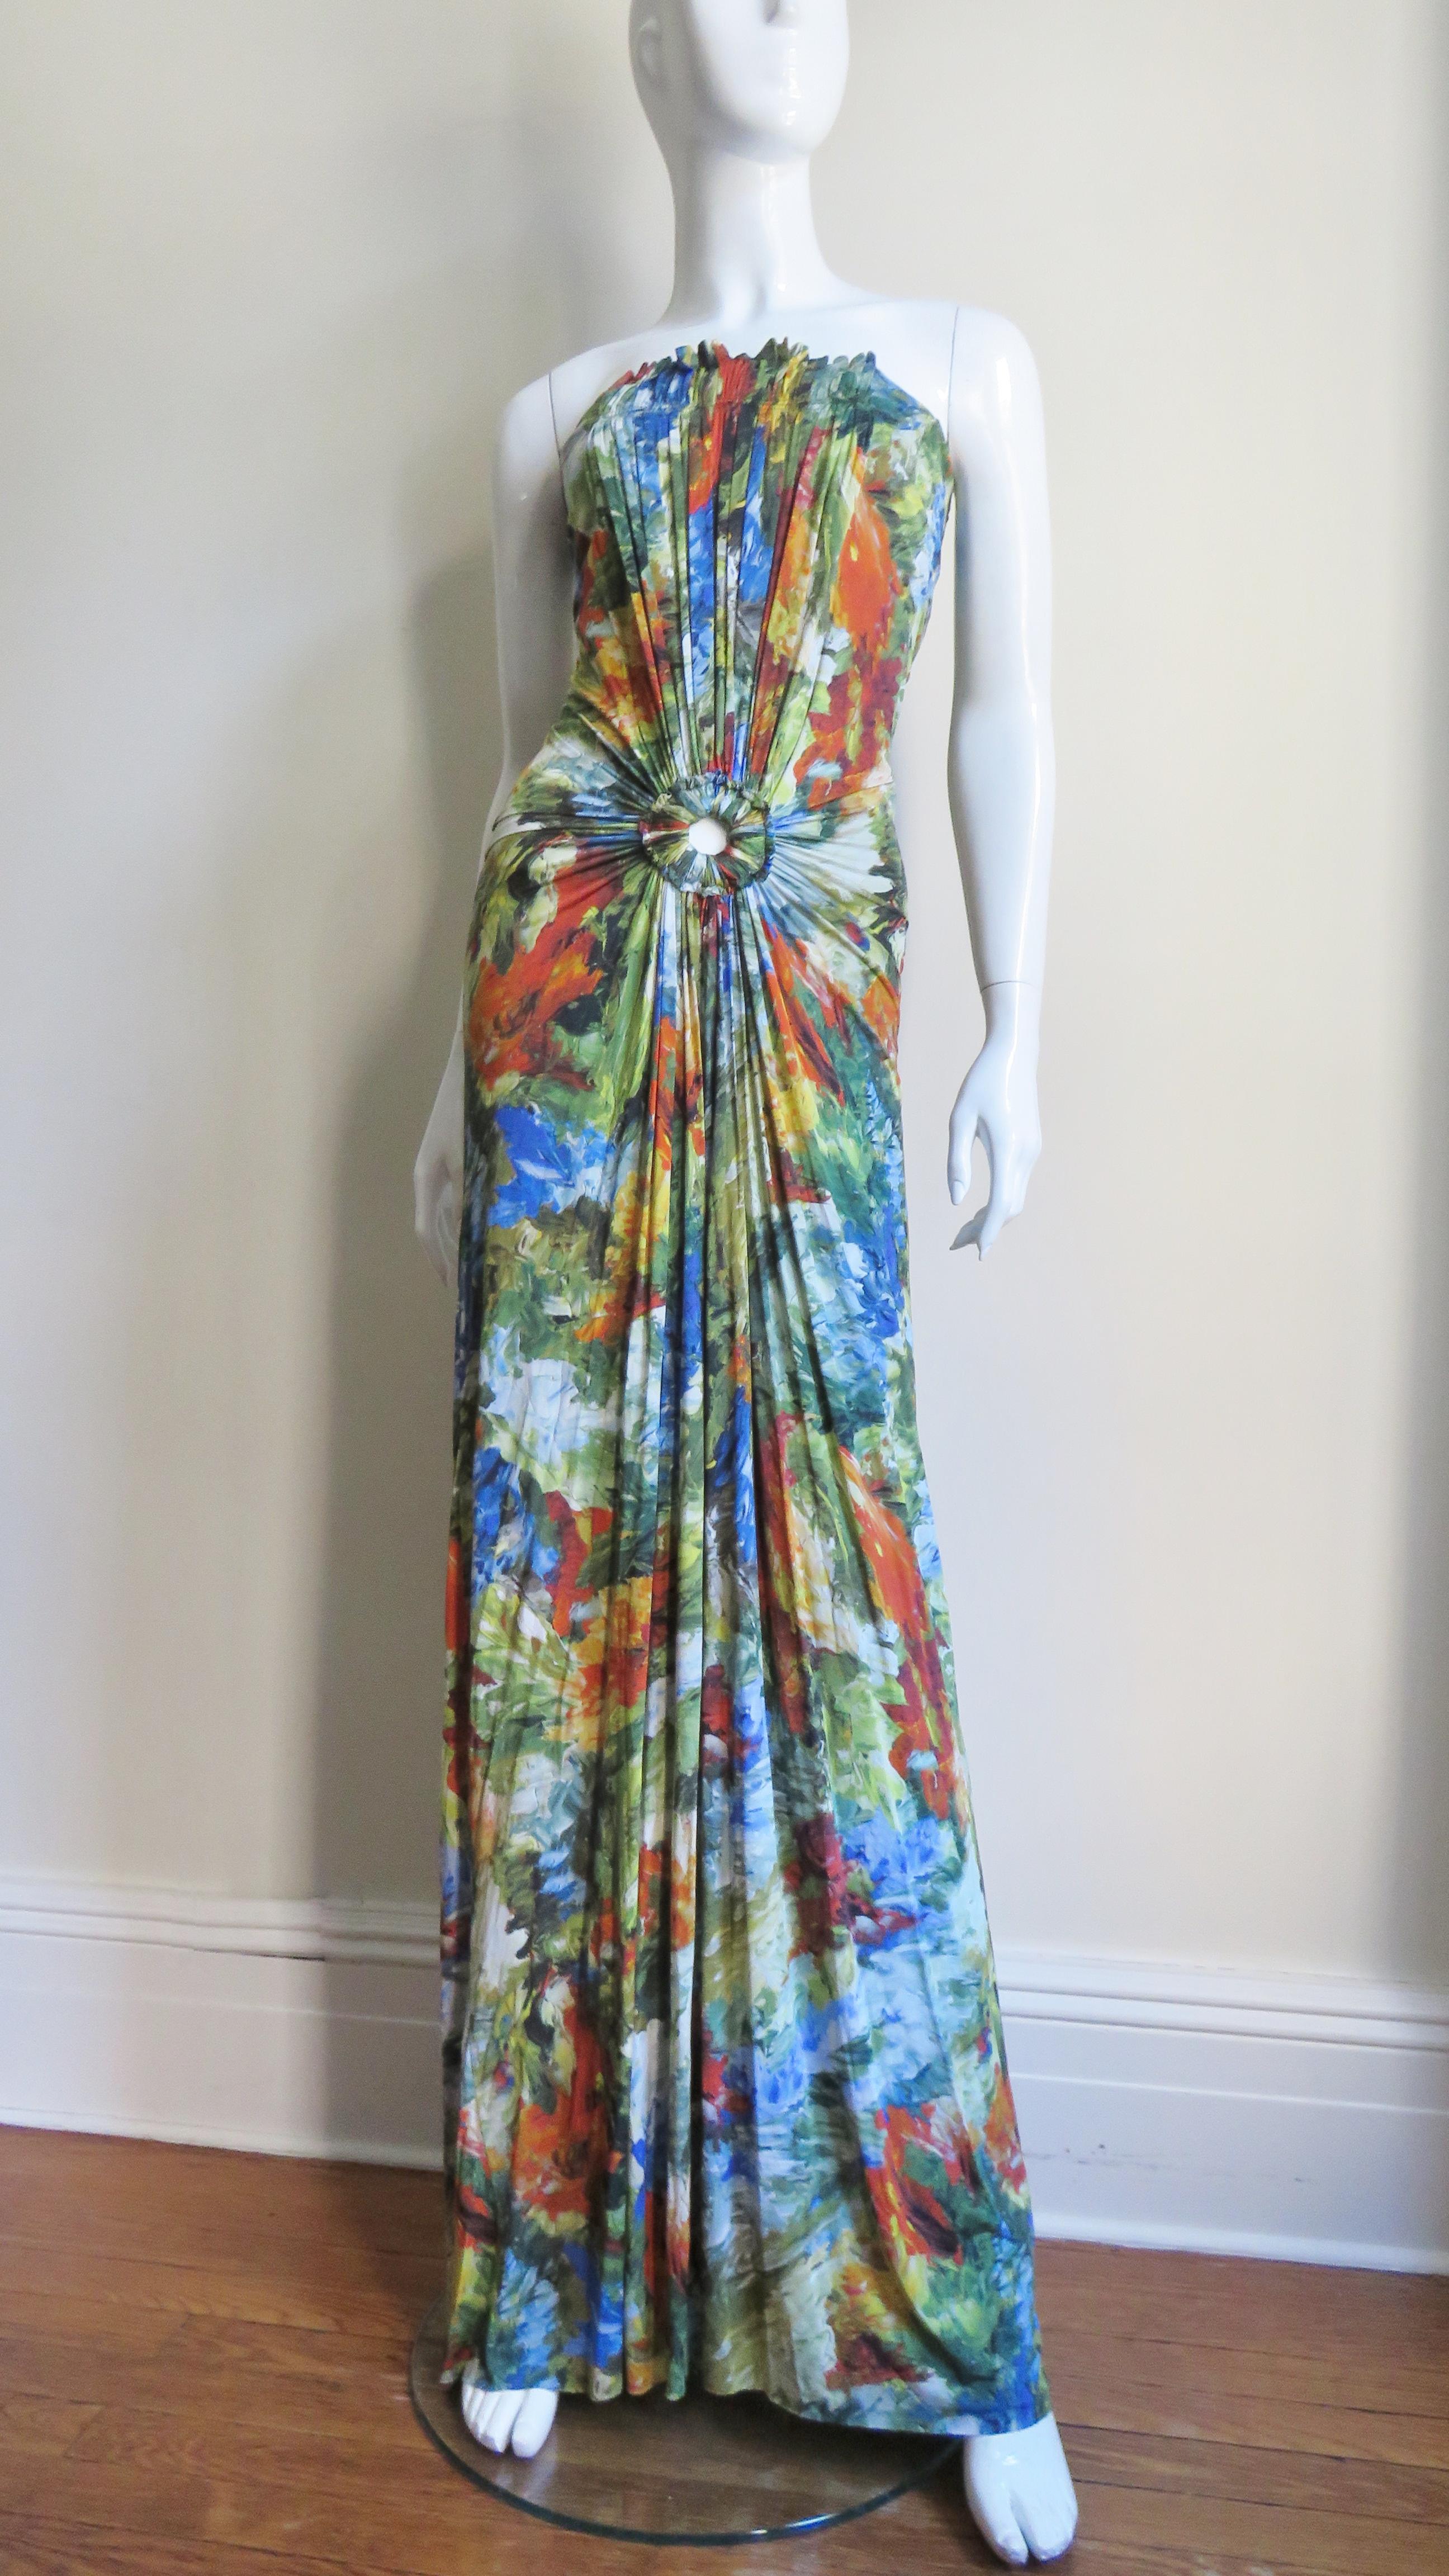 A beautiful silk jersey maxi dress from Jean Paul Gaultier in a blue, green, yellow and red abstract print.  It is strapless with ruching extending from the strapless bodice top through the hips all emanating from a circle cutout below the waist-